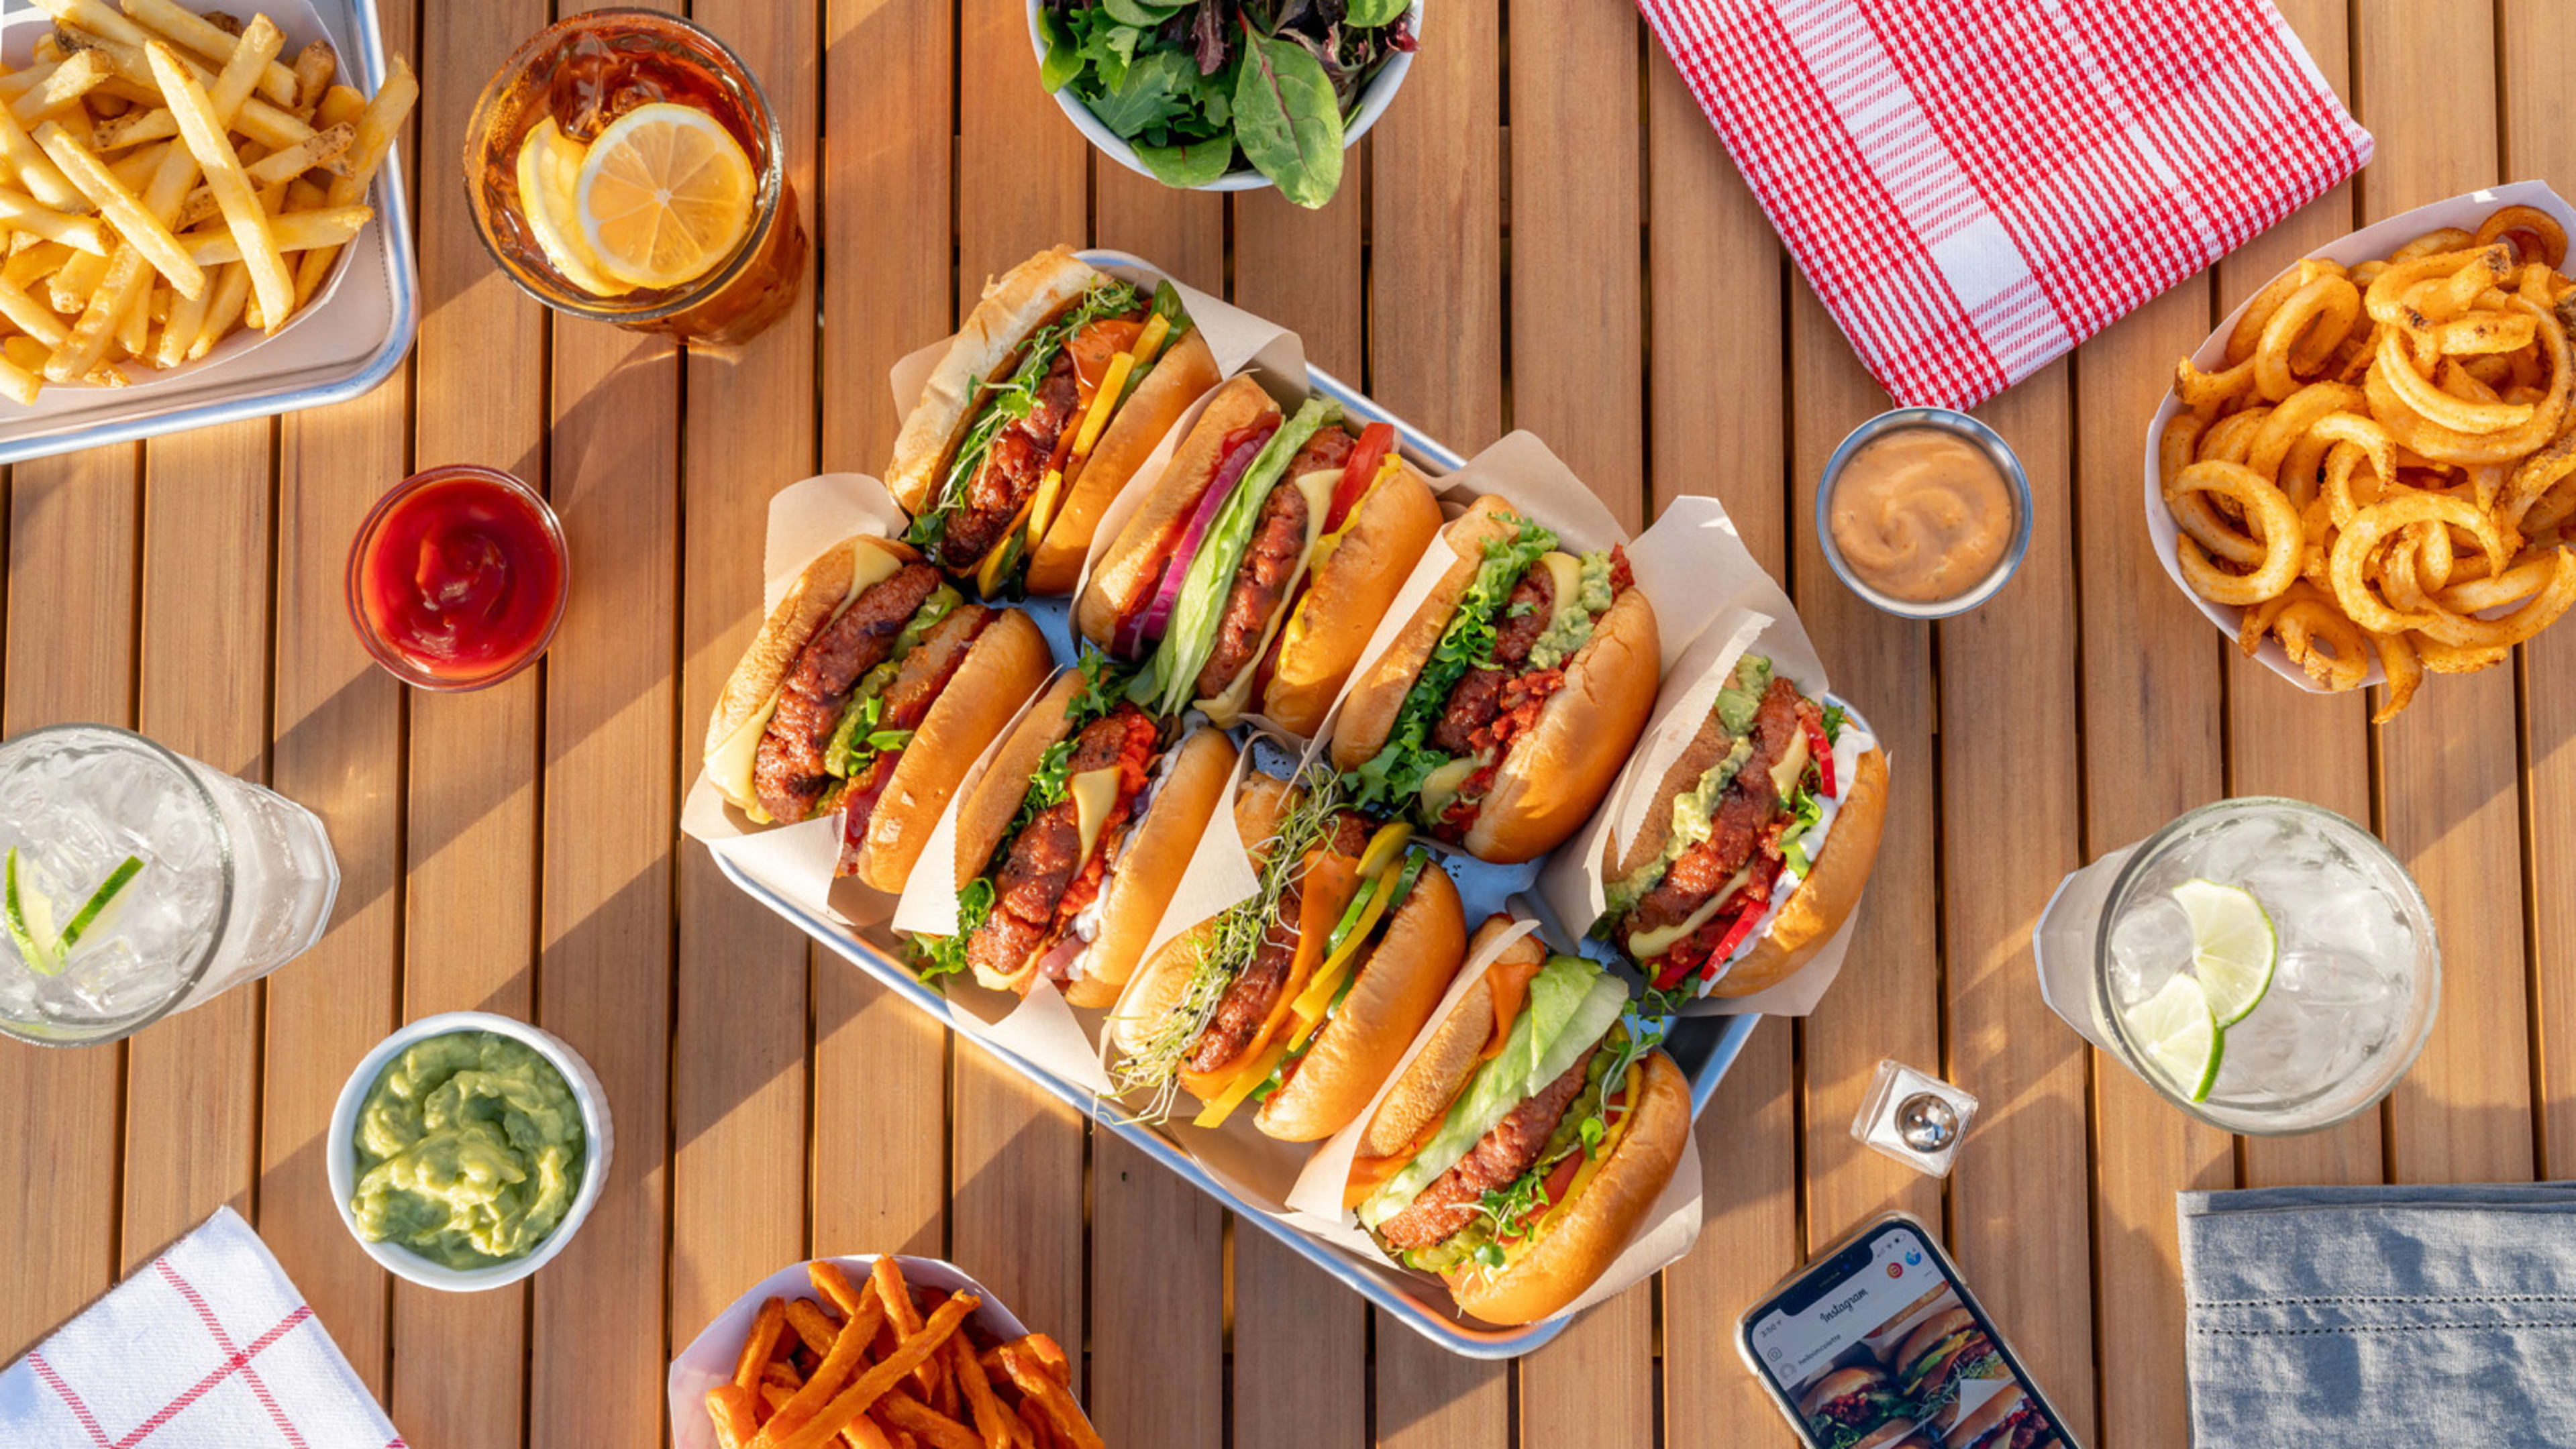 How an old veggie dog company is learning new tricks